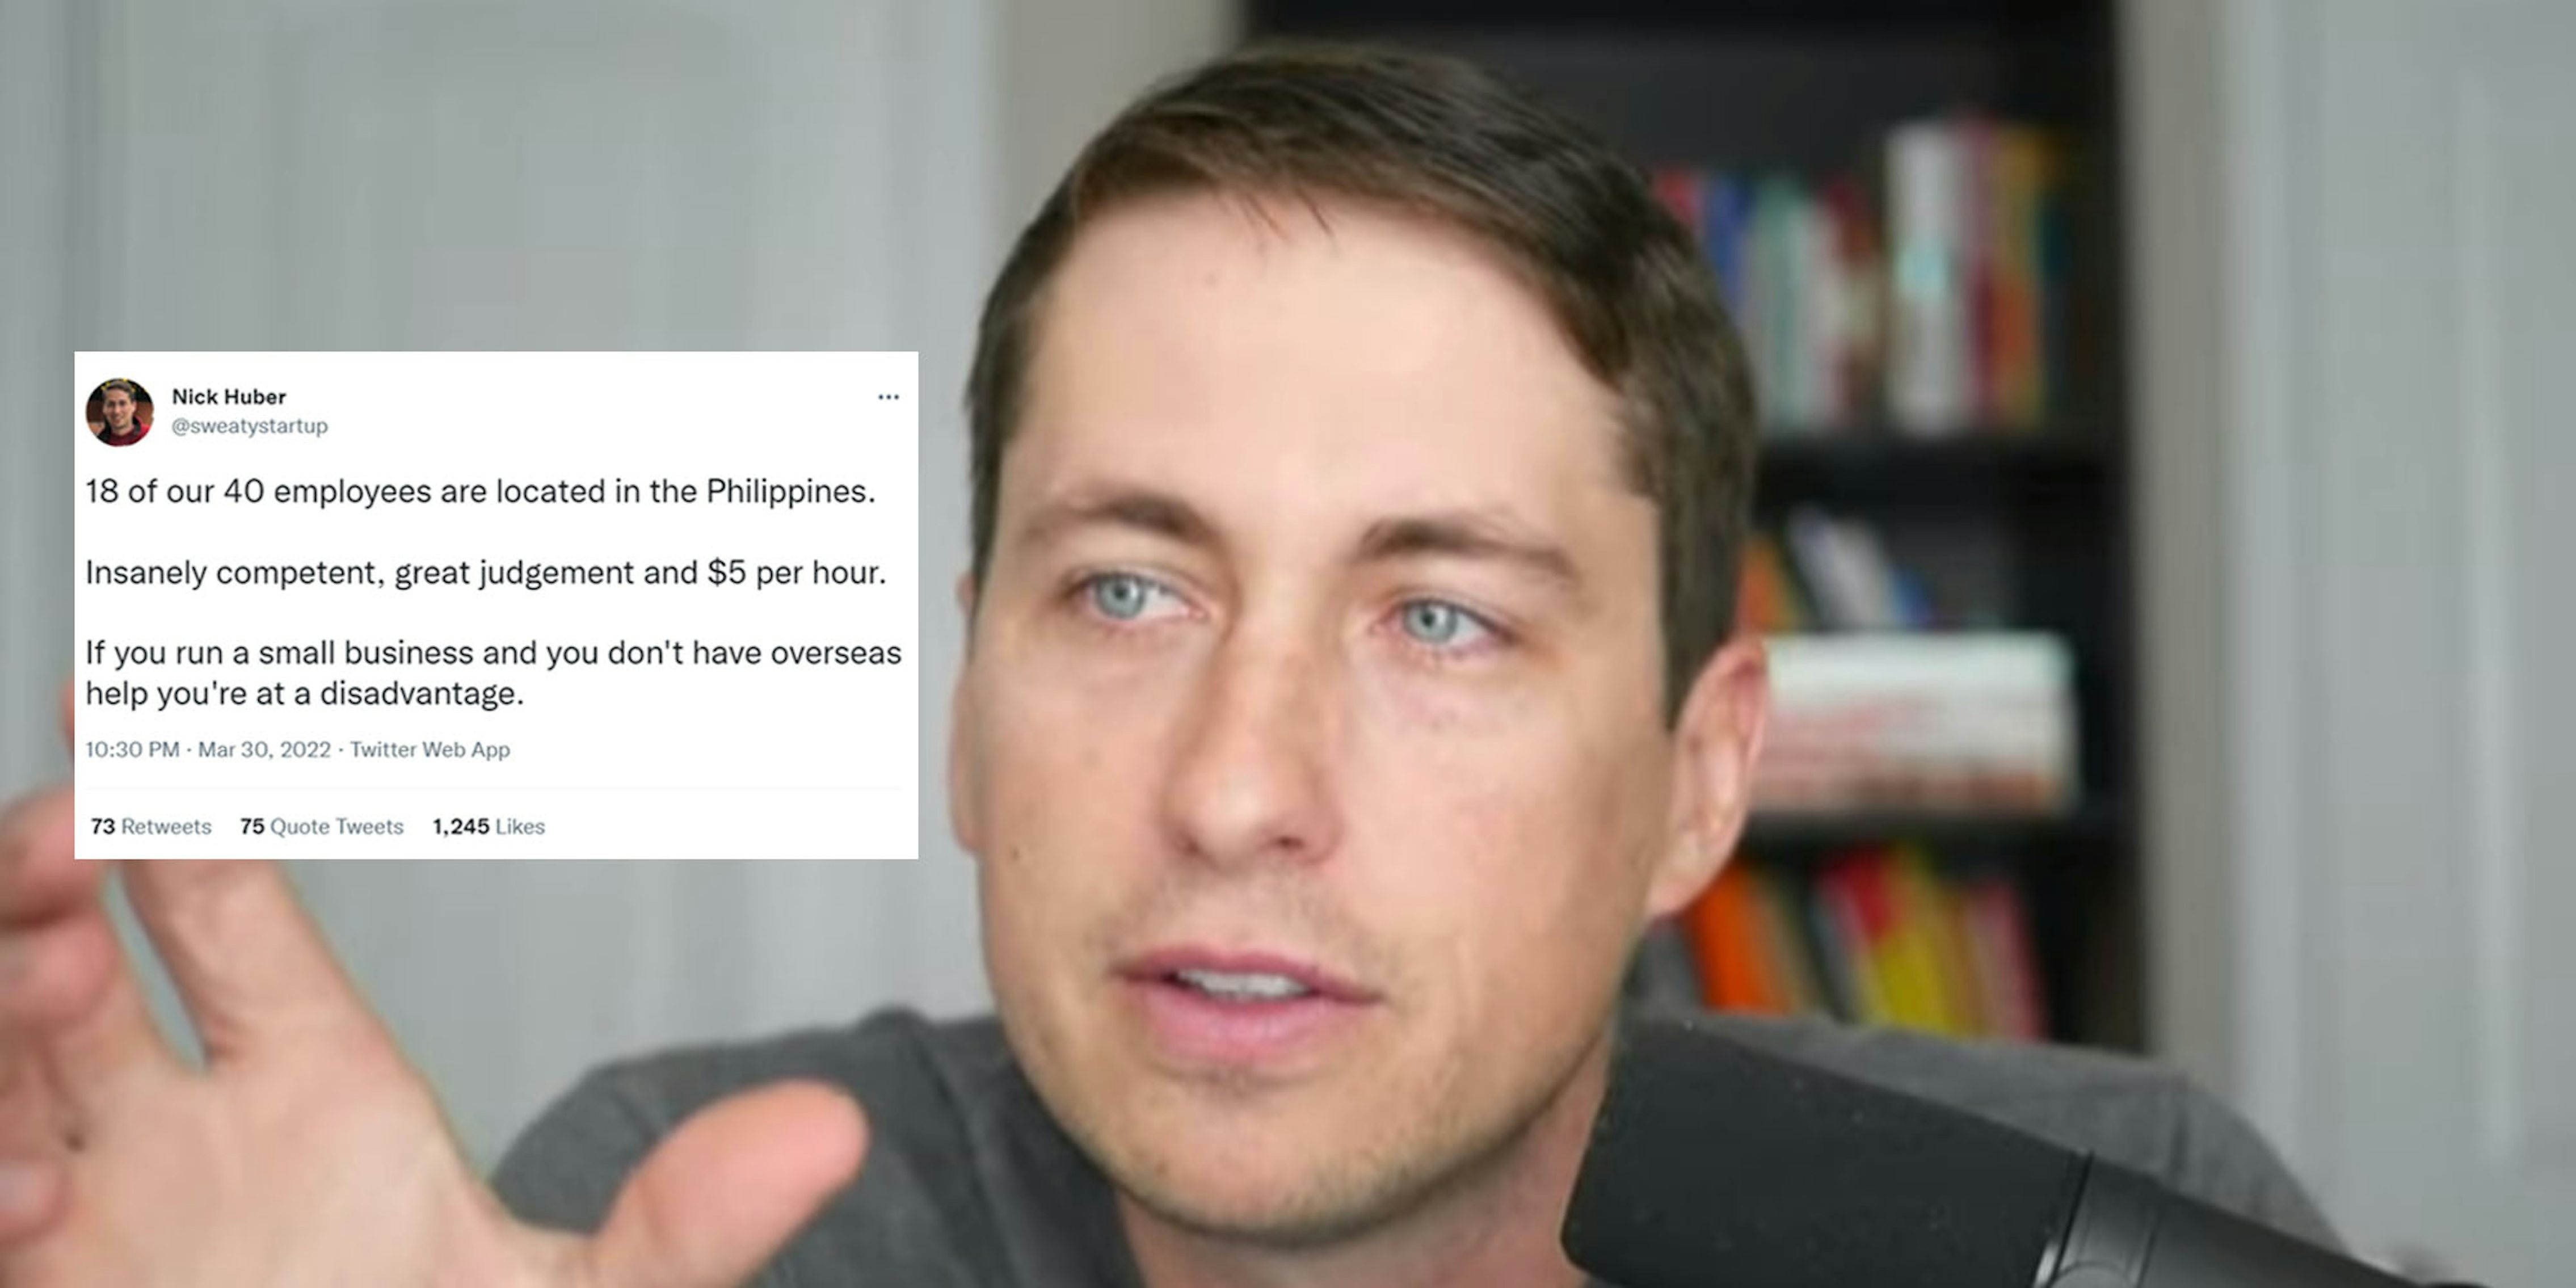 Nick Huber on his youtube show with tweet on left side '18 of our 40 employees are located in the Philippines. Insanely competent, great judgement and $5 per hour. If you run a small business and you don't have overseas help you're at a disadvantage'